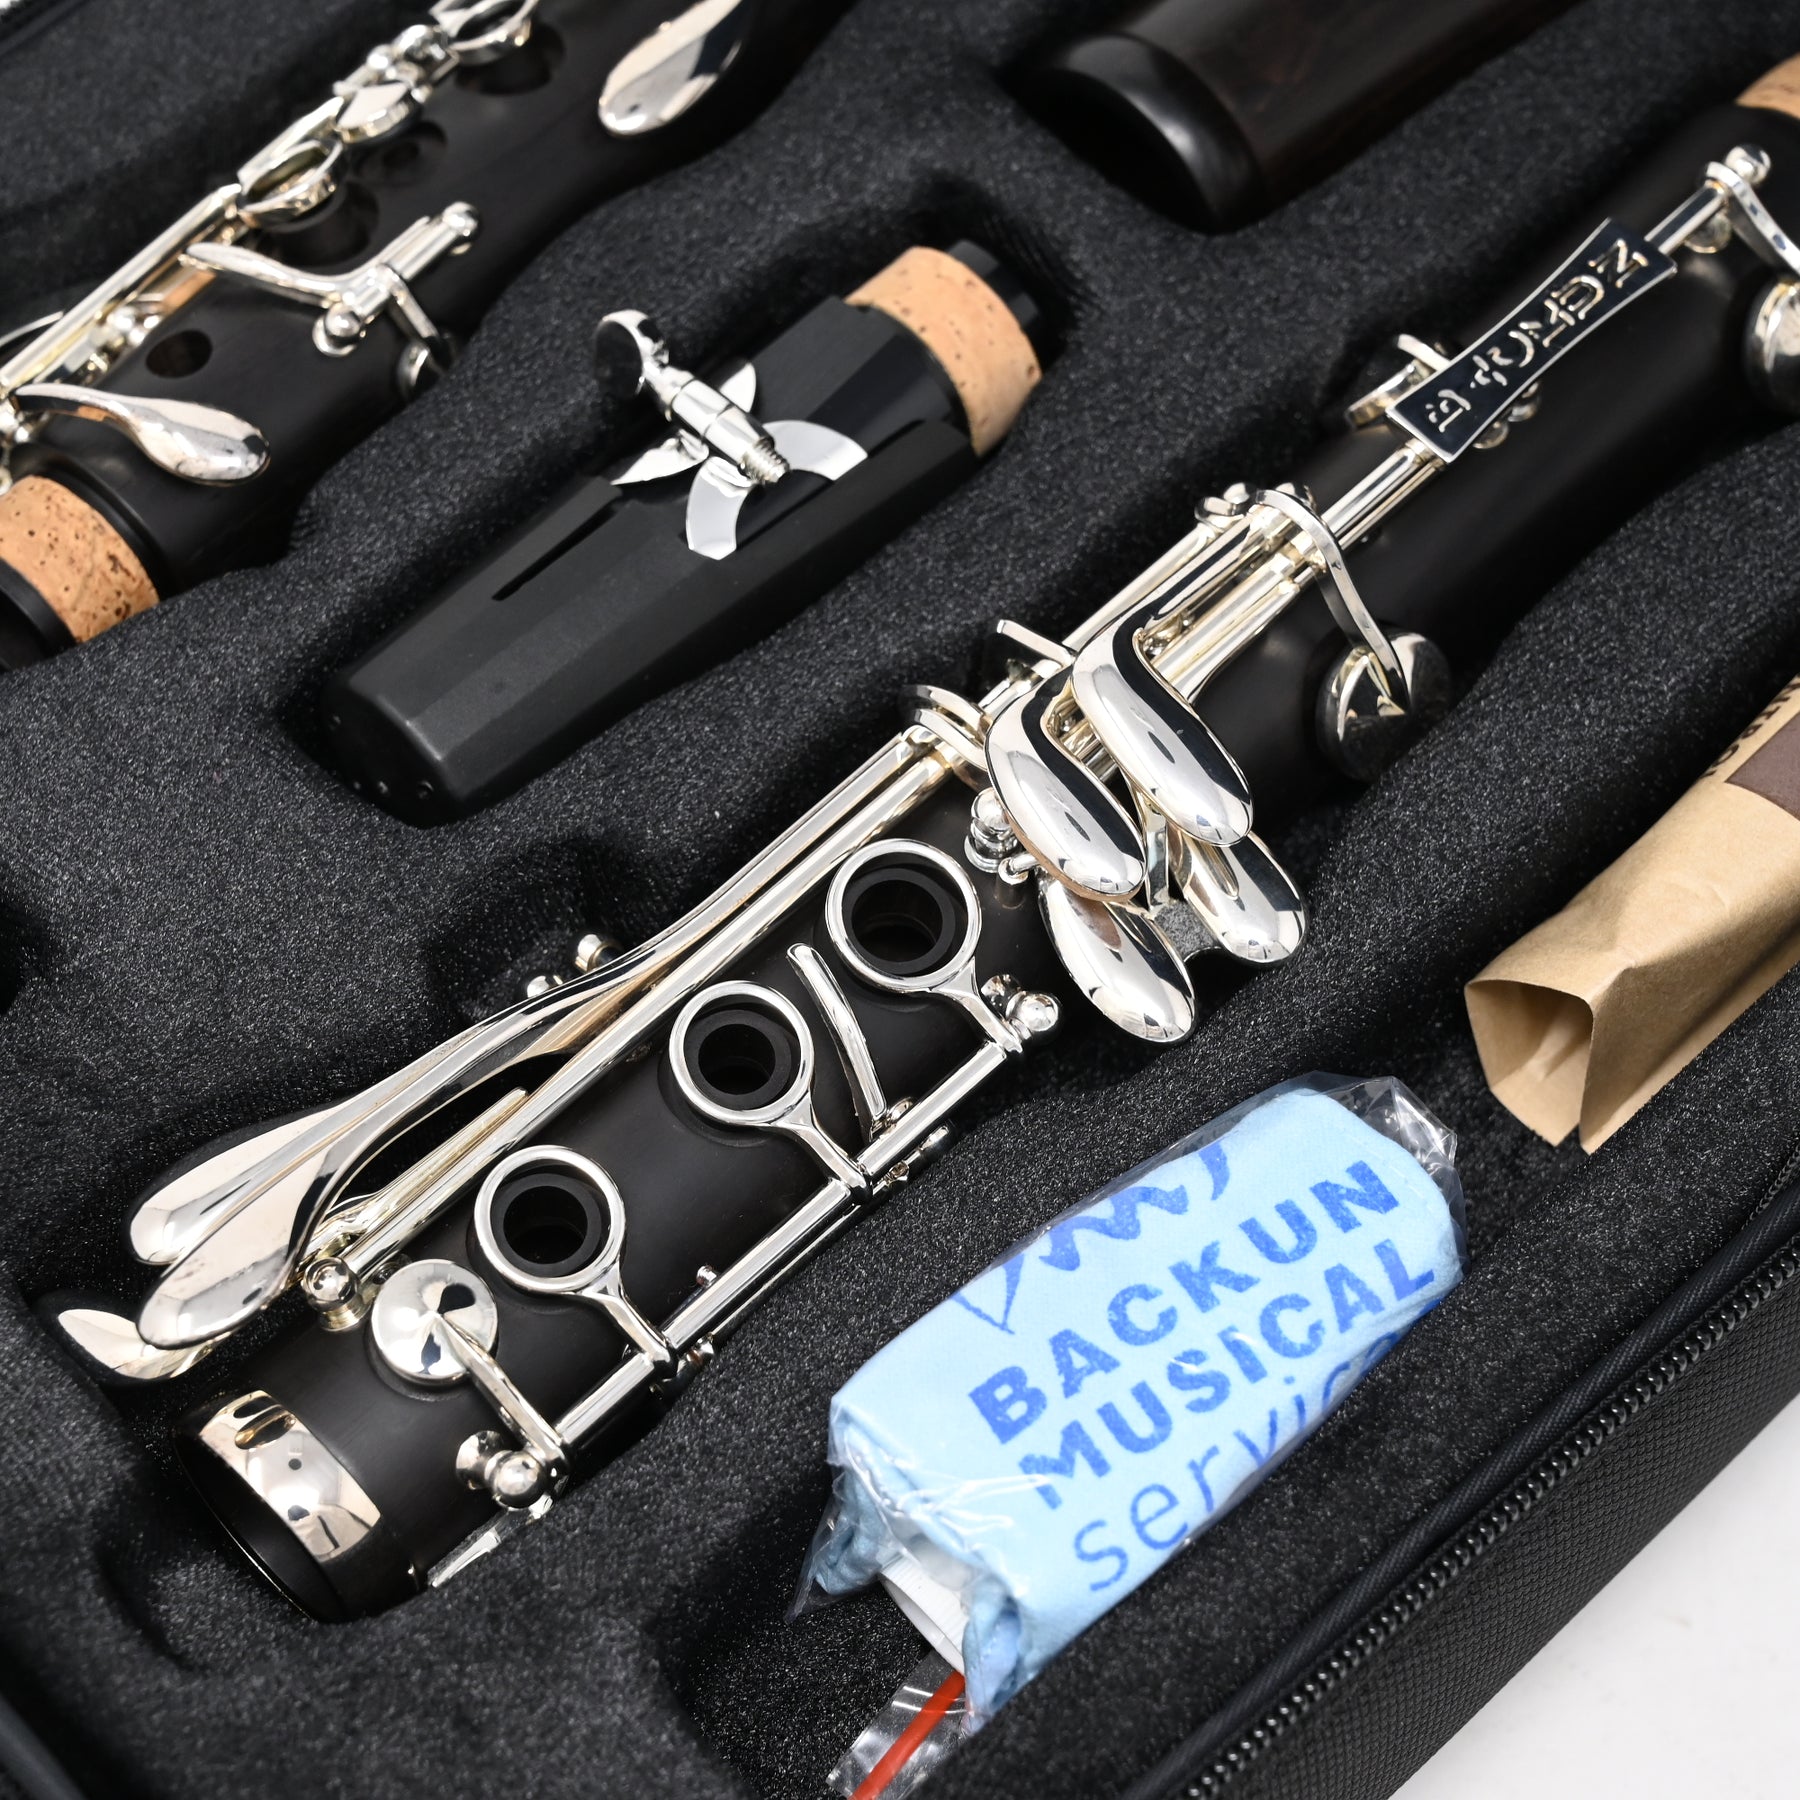 Pre-Owned Beta Bb Clarinet, Grenadilla with Silver Keys (CL. 19)